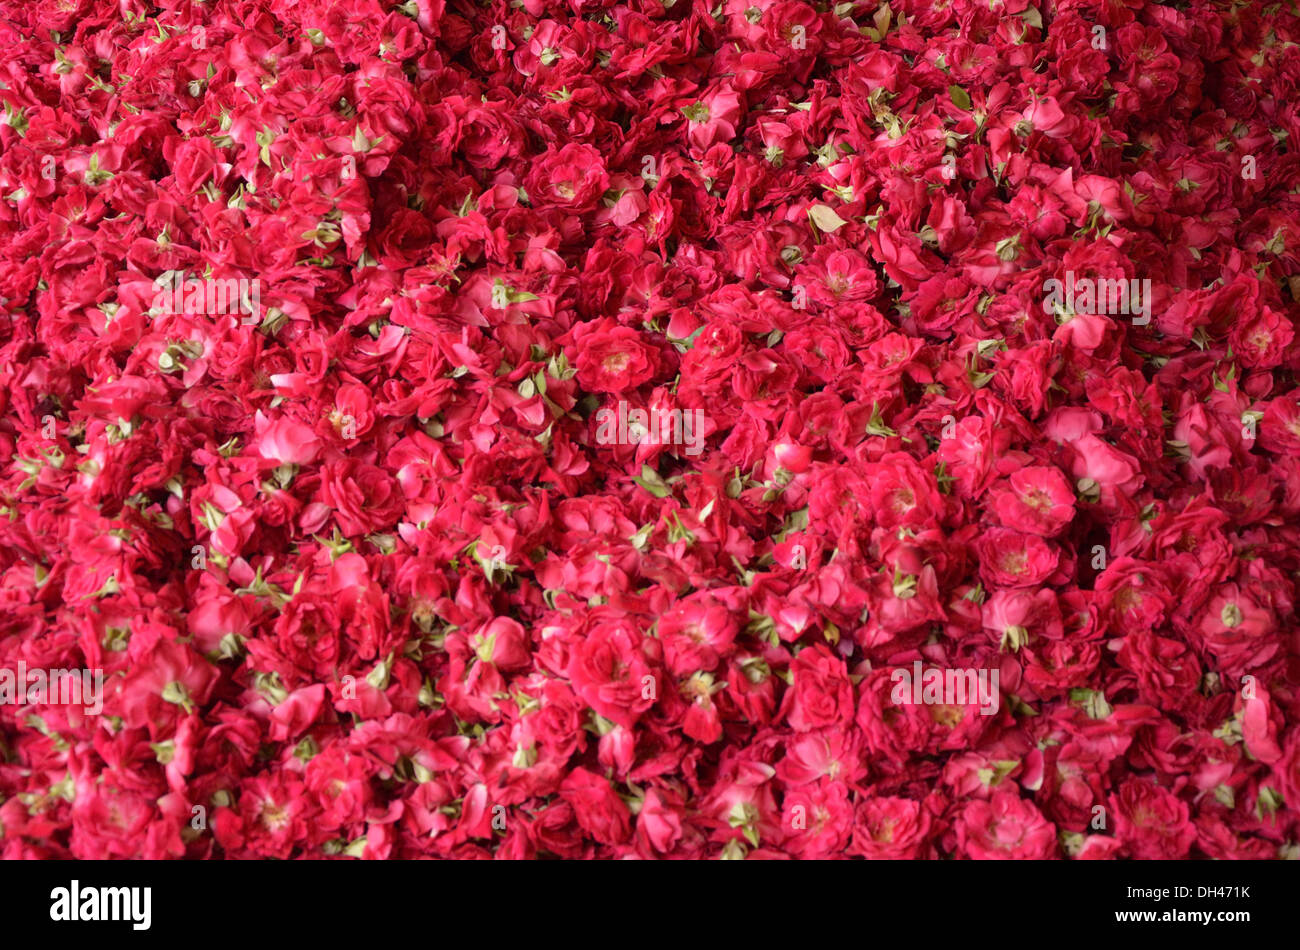 Pile of red roses in Jodhpur Rajasthan India Asia Stock Photo